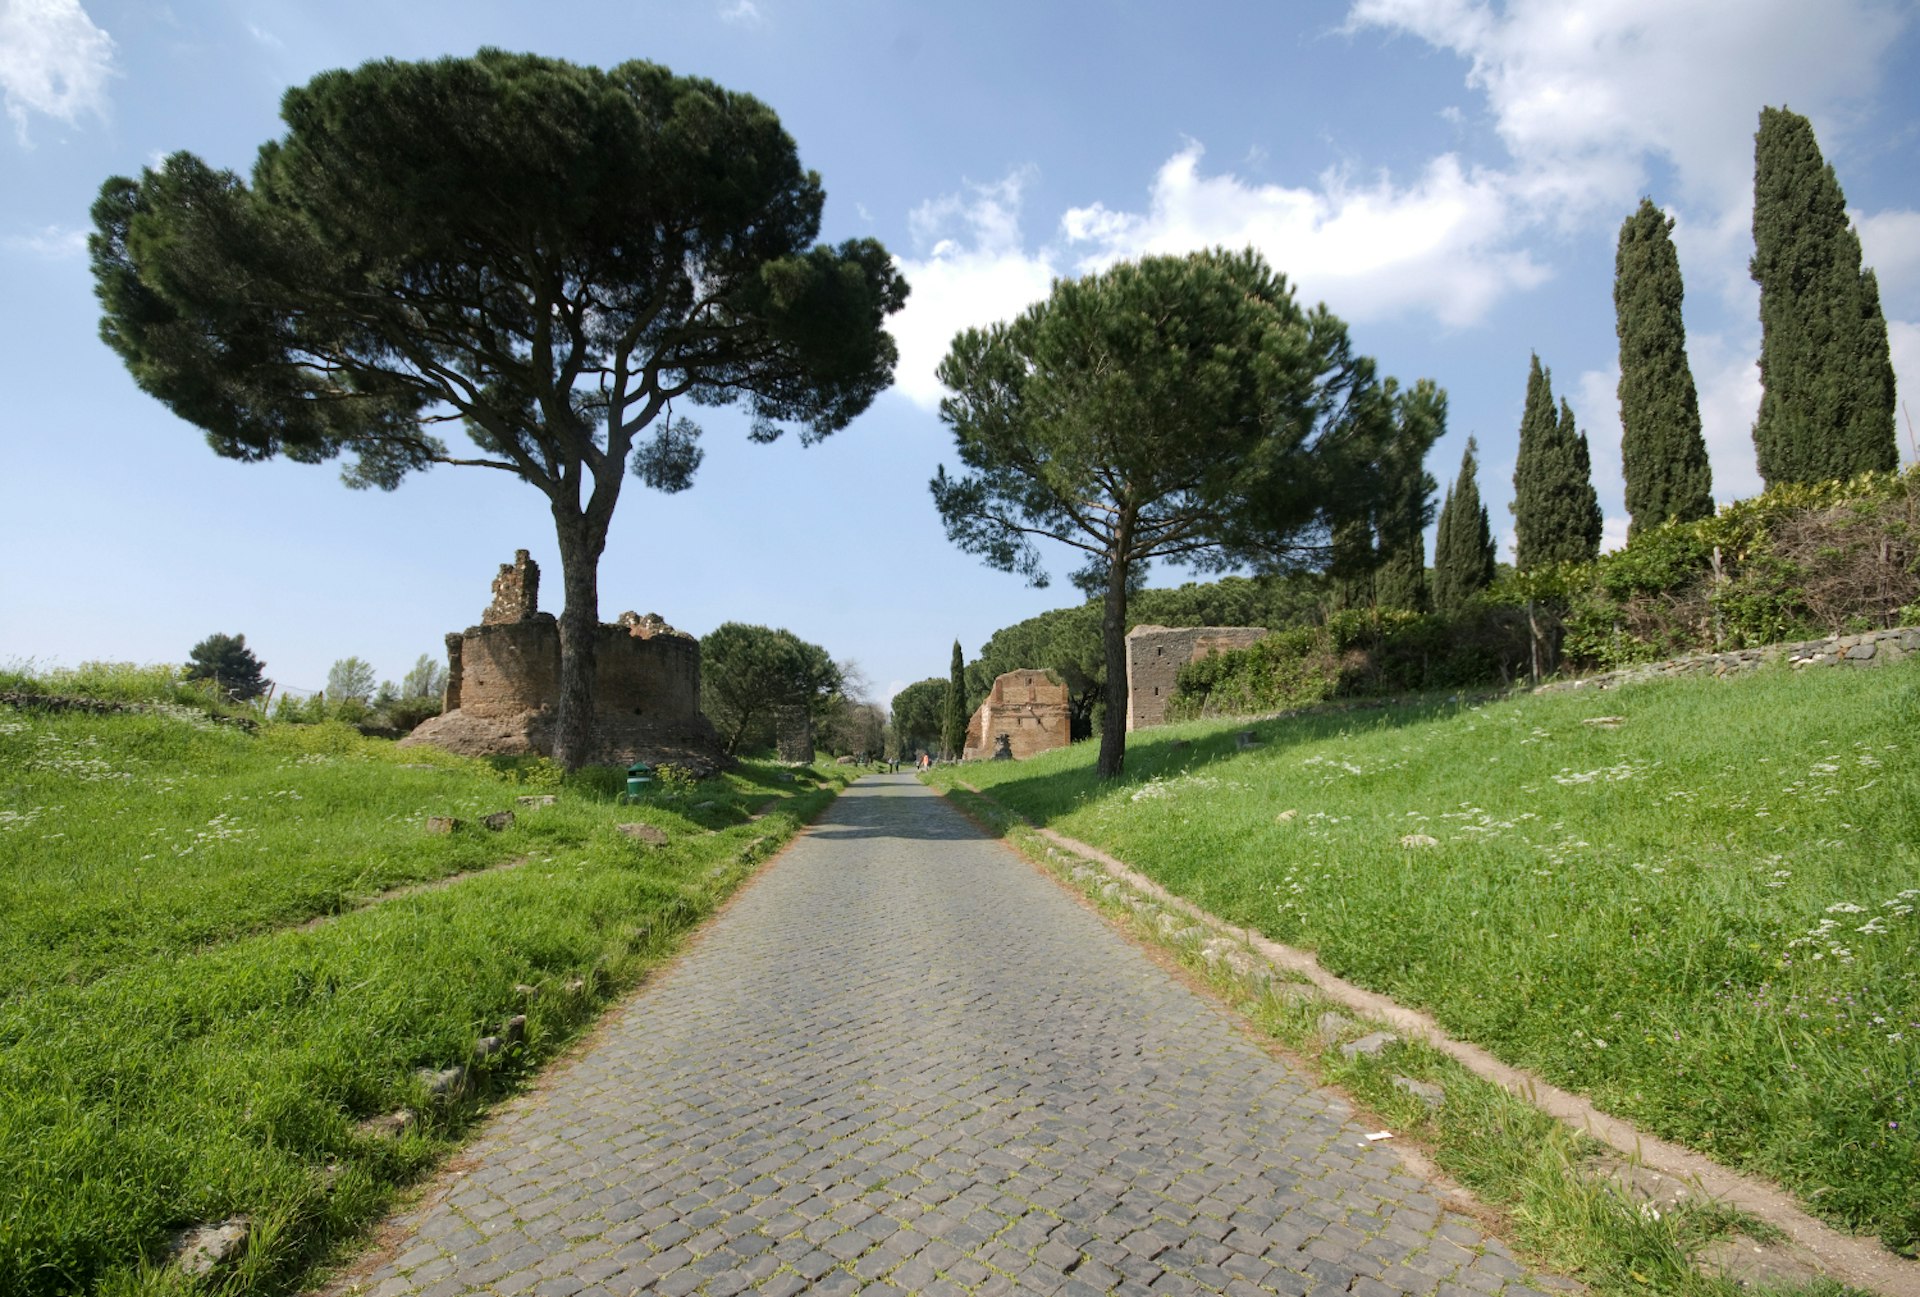 The Via Appia Antica is perfect for cycling.